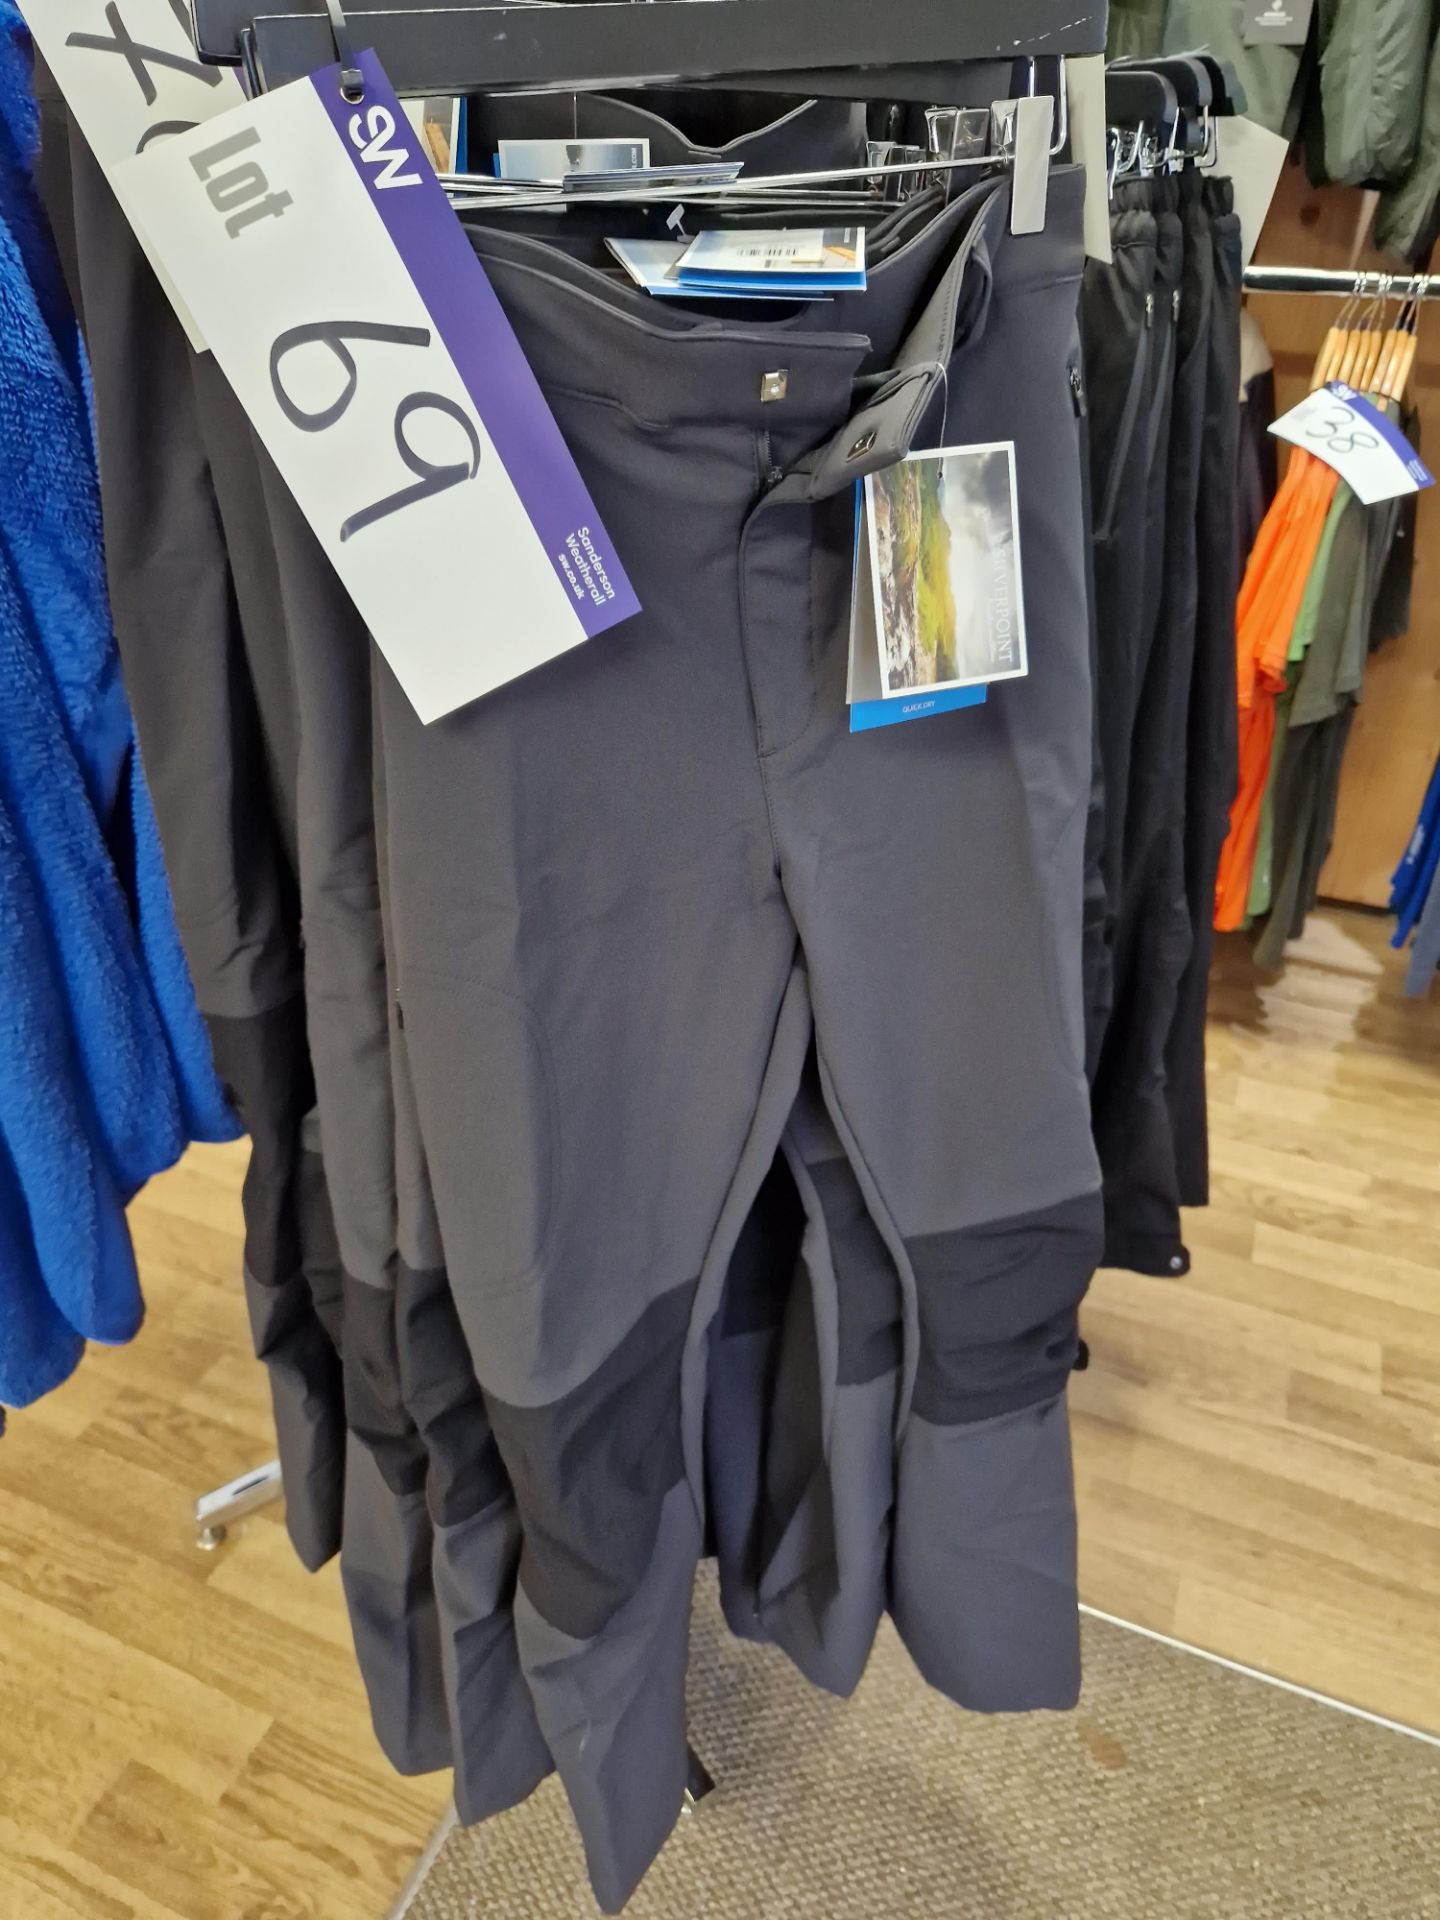 Four Silverpoint New Glenmore 6105 Waterproof Trousers, Colour: Graphite Grey, Sizes: 48/32, 52/